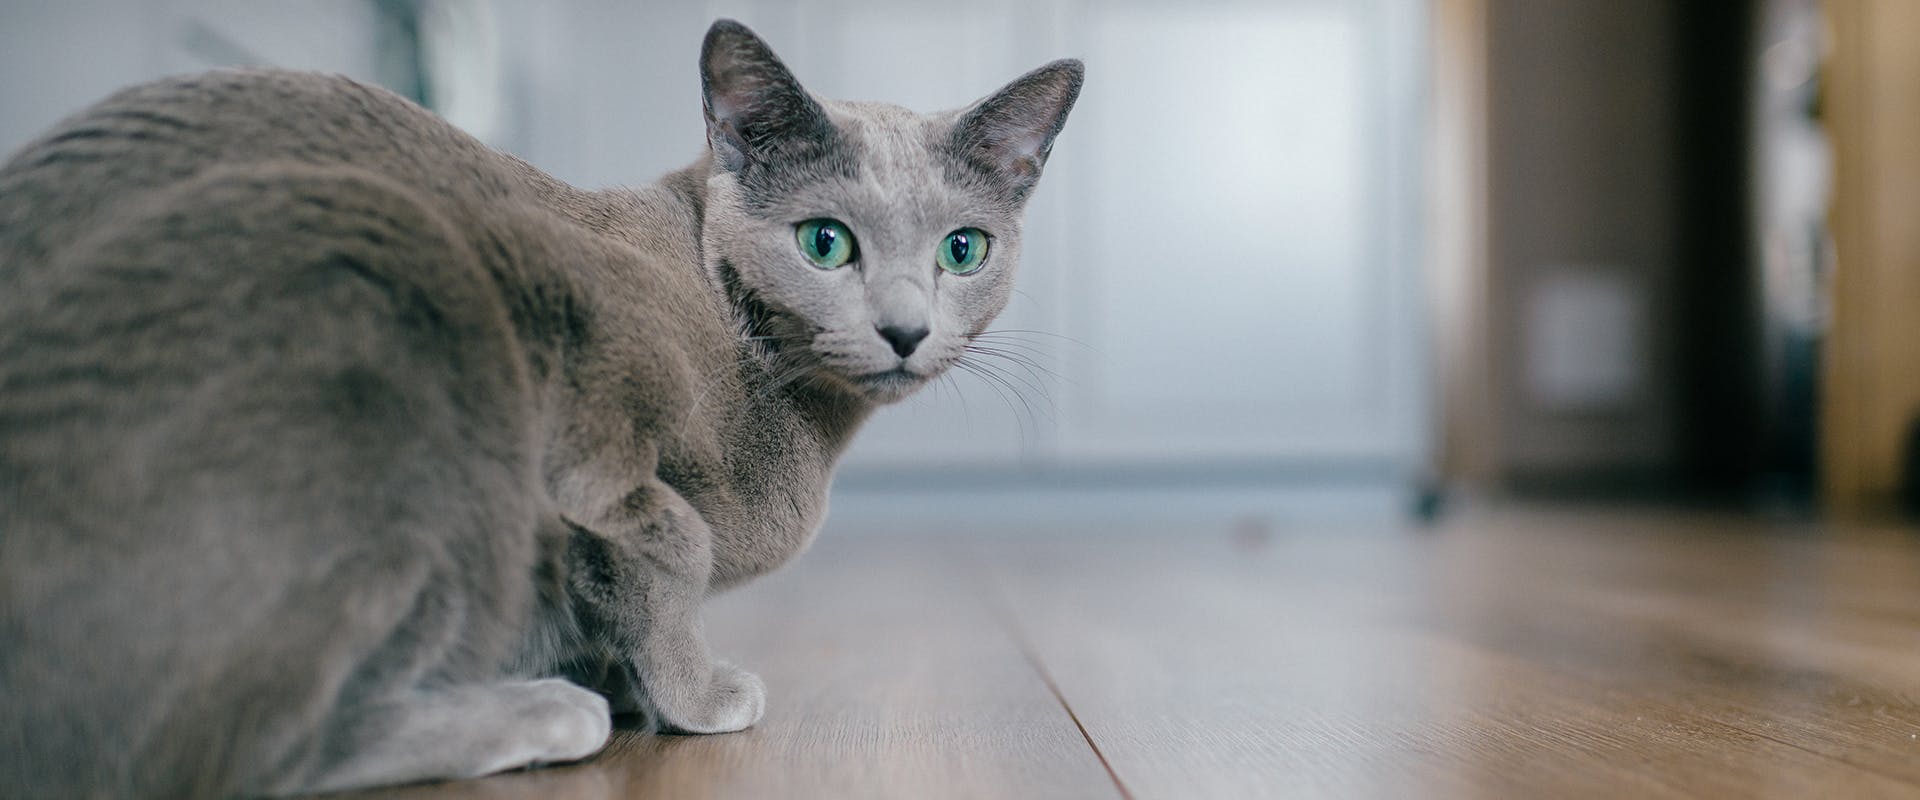 A Blue Russian cat perched down in a crouching position